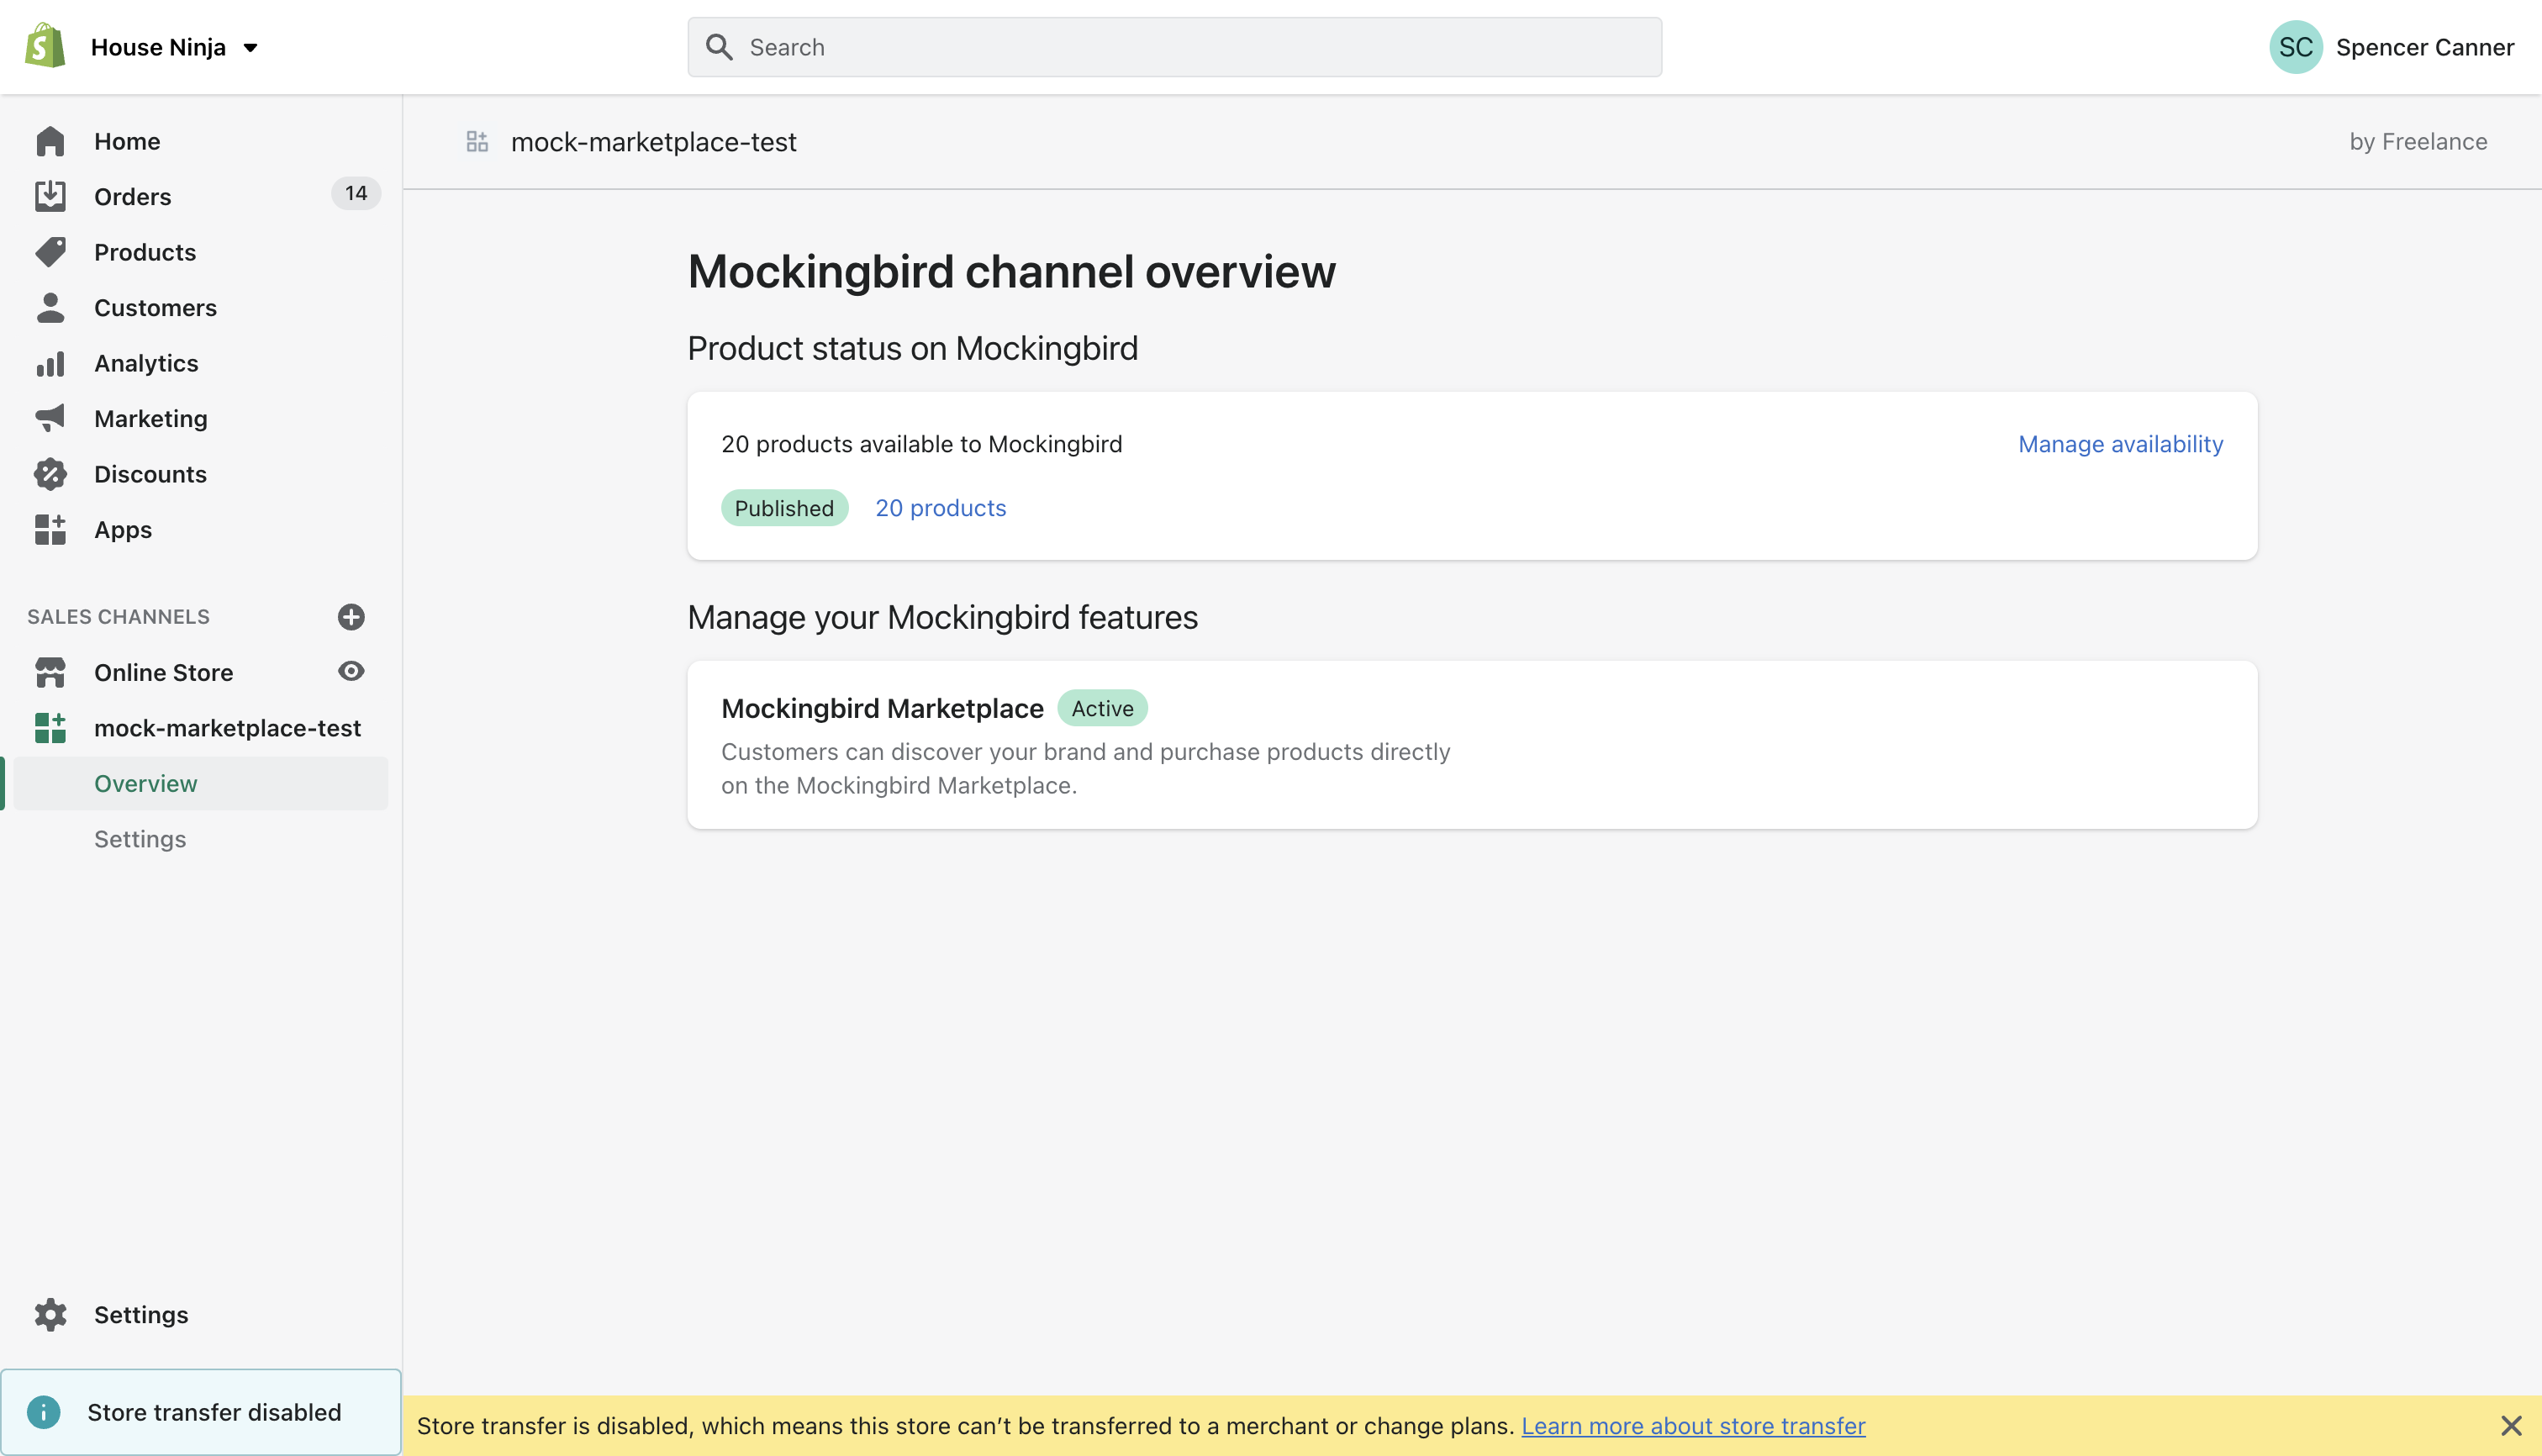 The channel overview of the demo store Mockingbird which demonstrates the options available to users after clicking on the sales channel. It has a section displaying Product Status for Mockingbird and a section for managing features. 